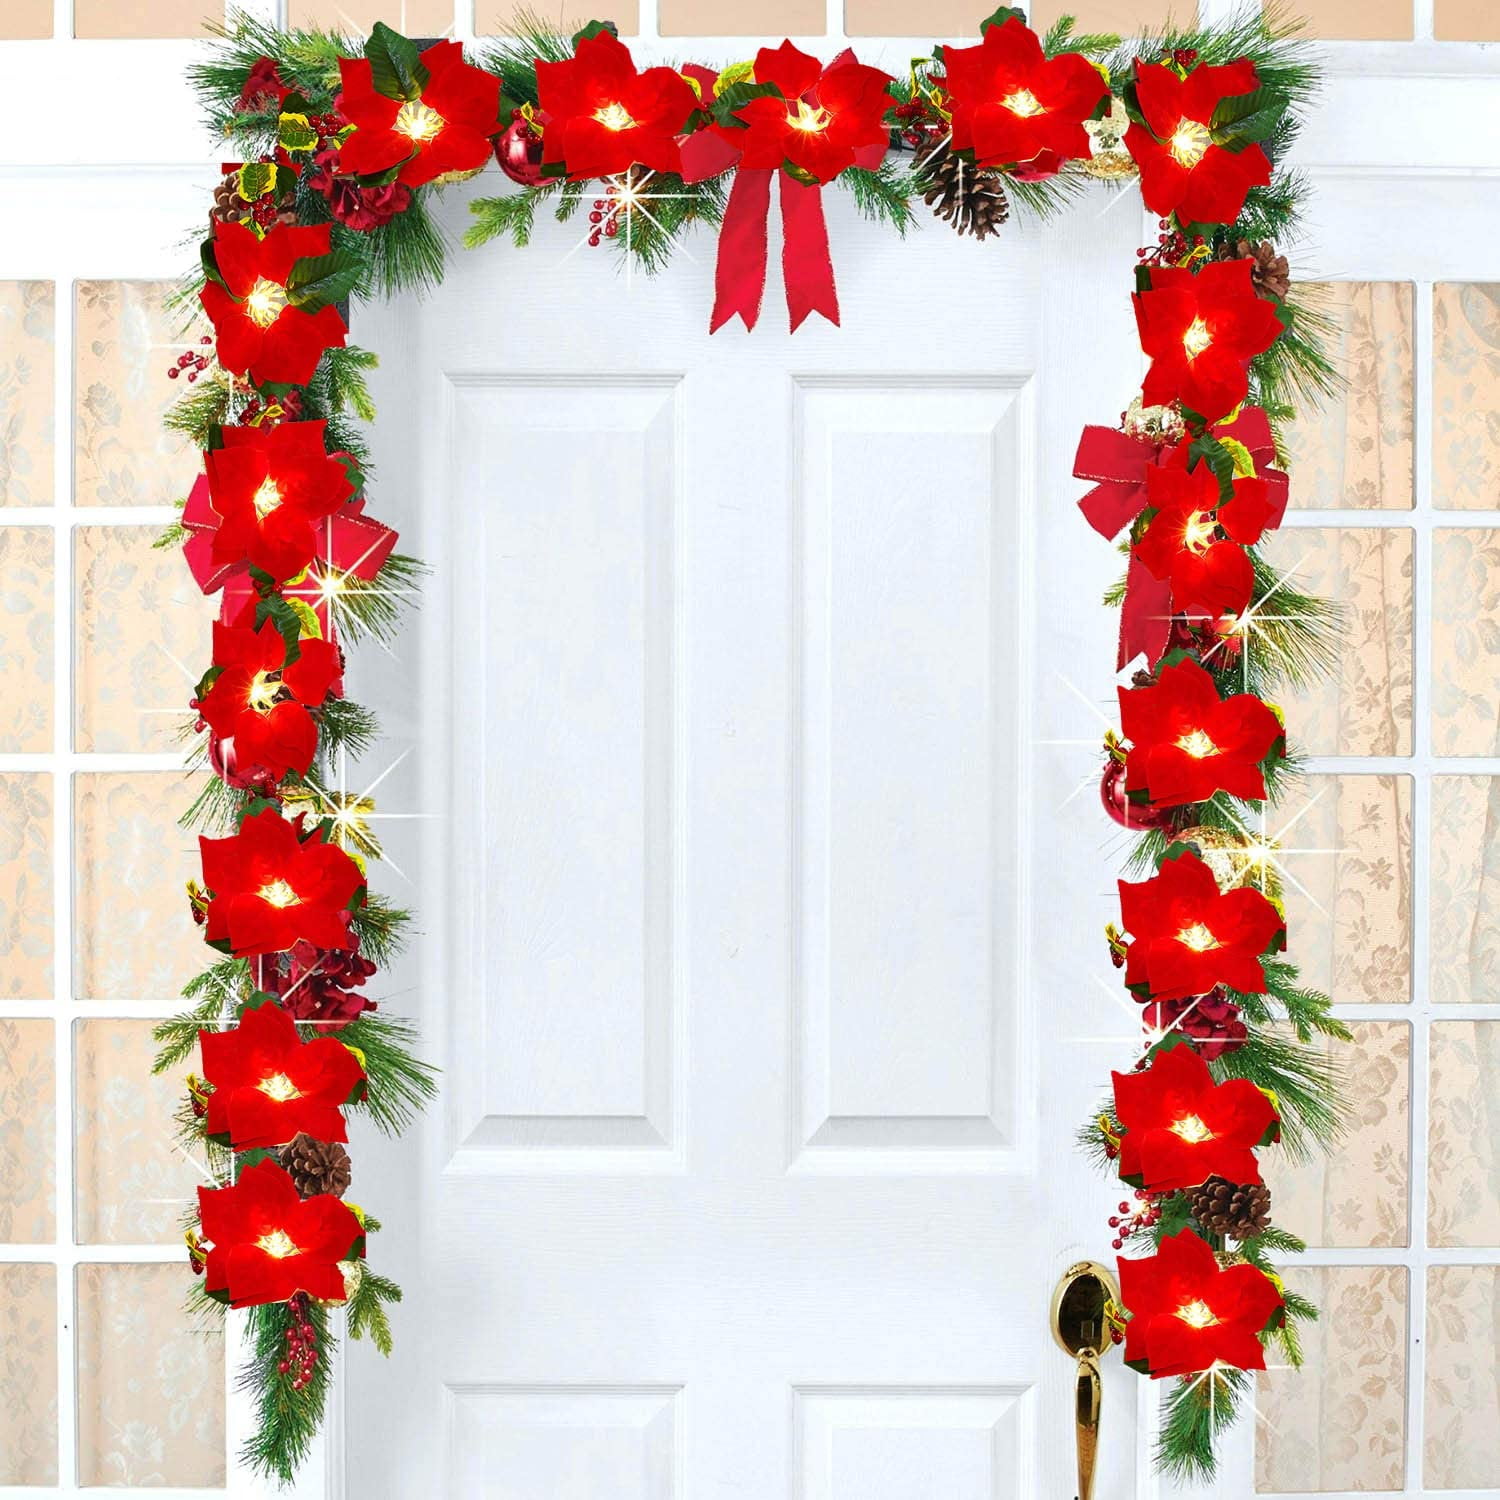 Velvet Artificial Poinsettia Garland Berries Holly Leaves 3AA Battery Operated 